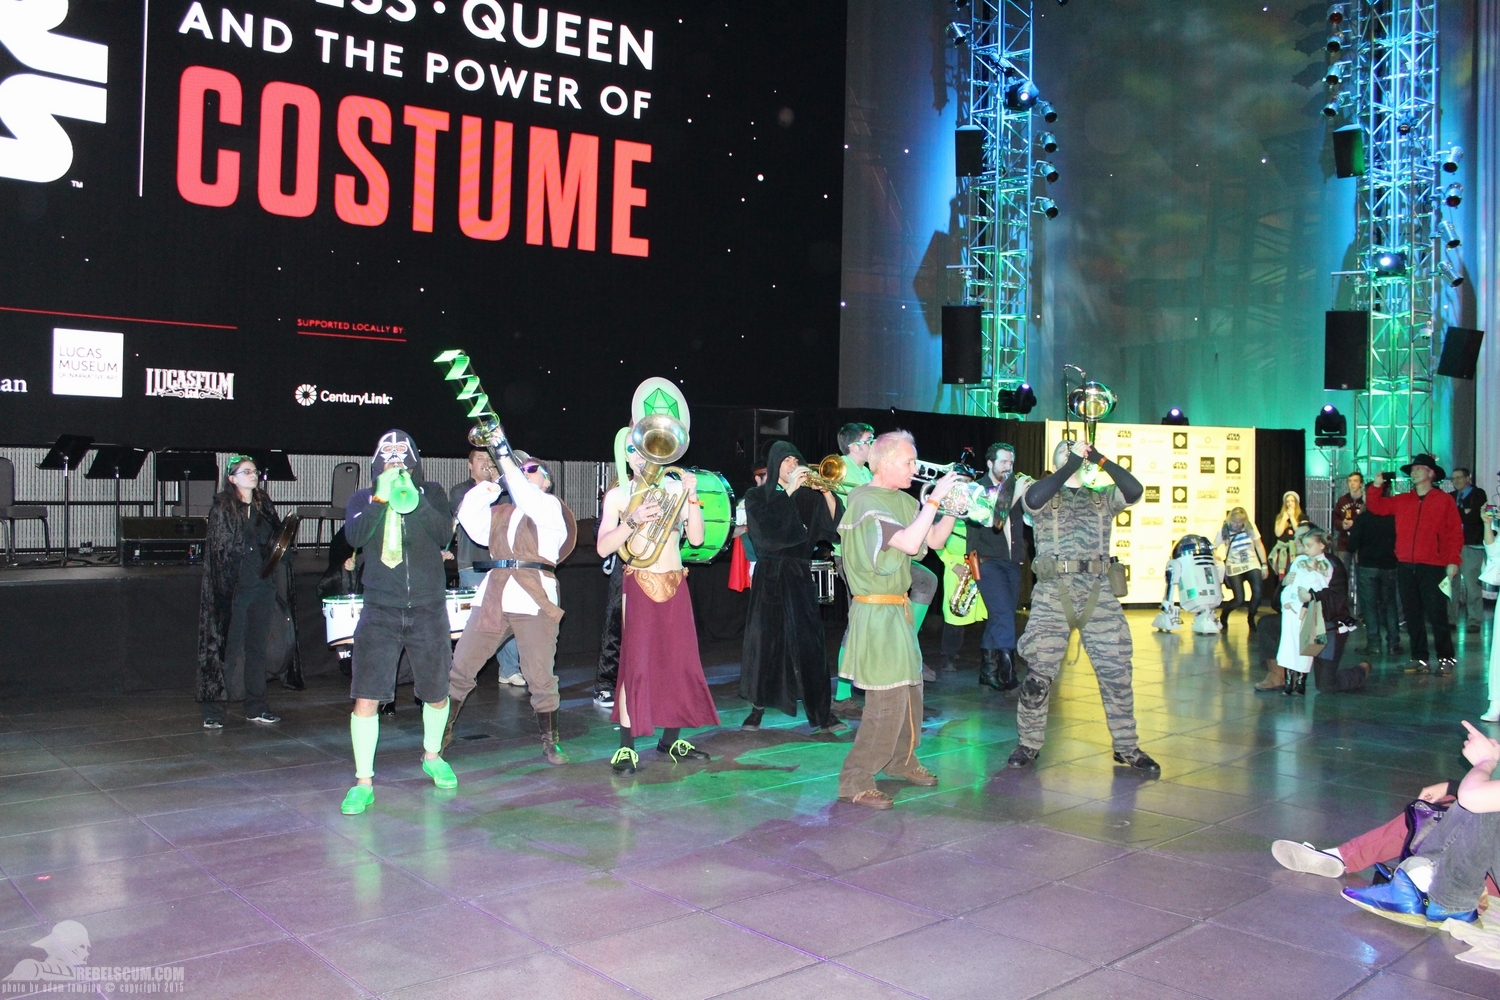 star-wars-the-power-of-costume-seattle-emp-museum-launch-party-013015-008.JPG